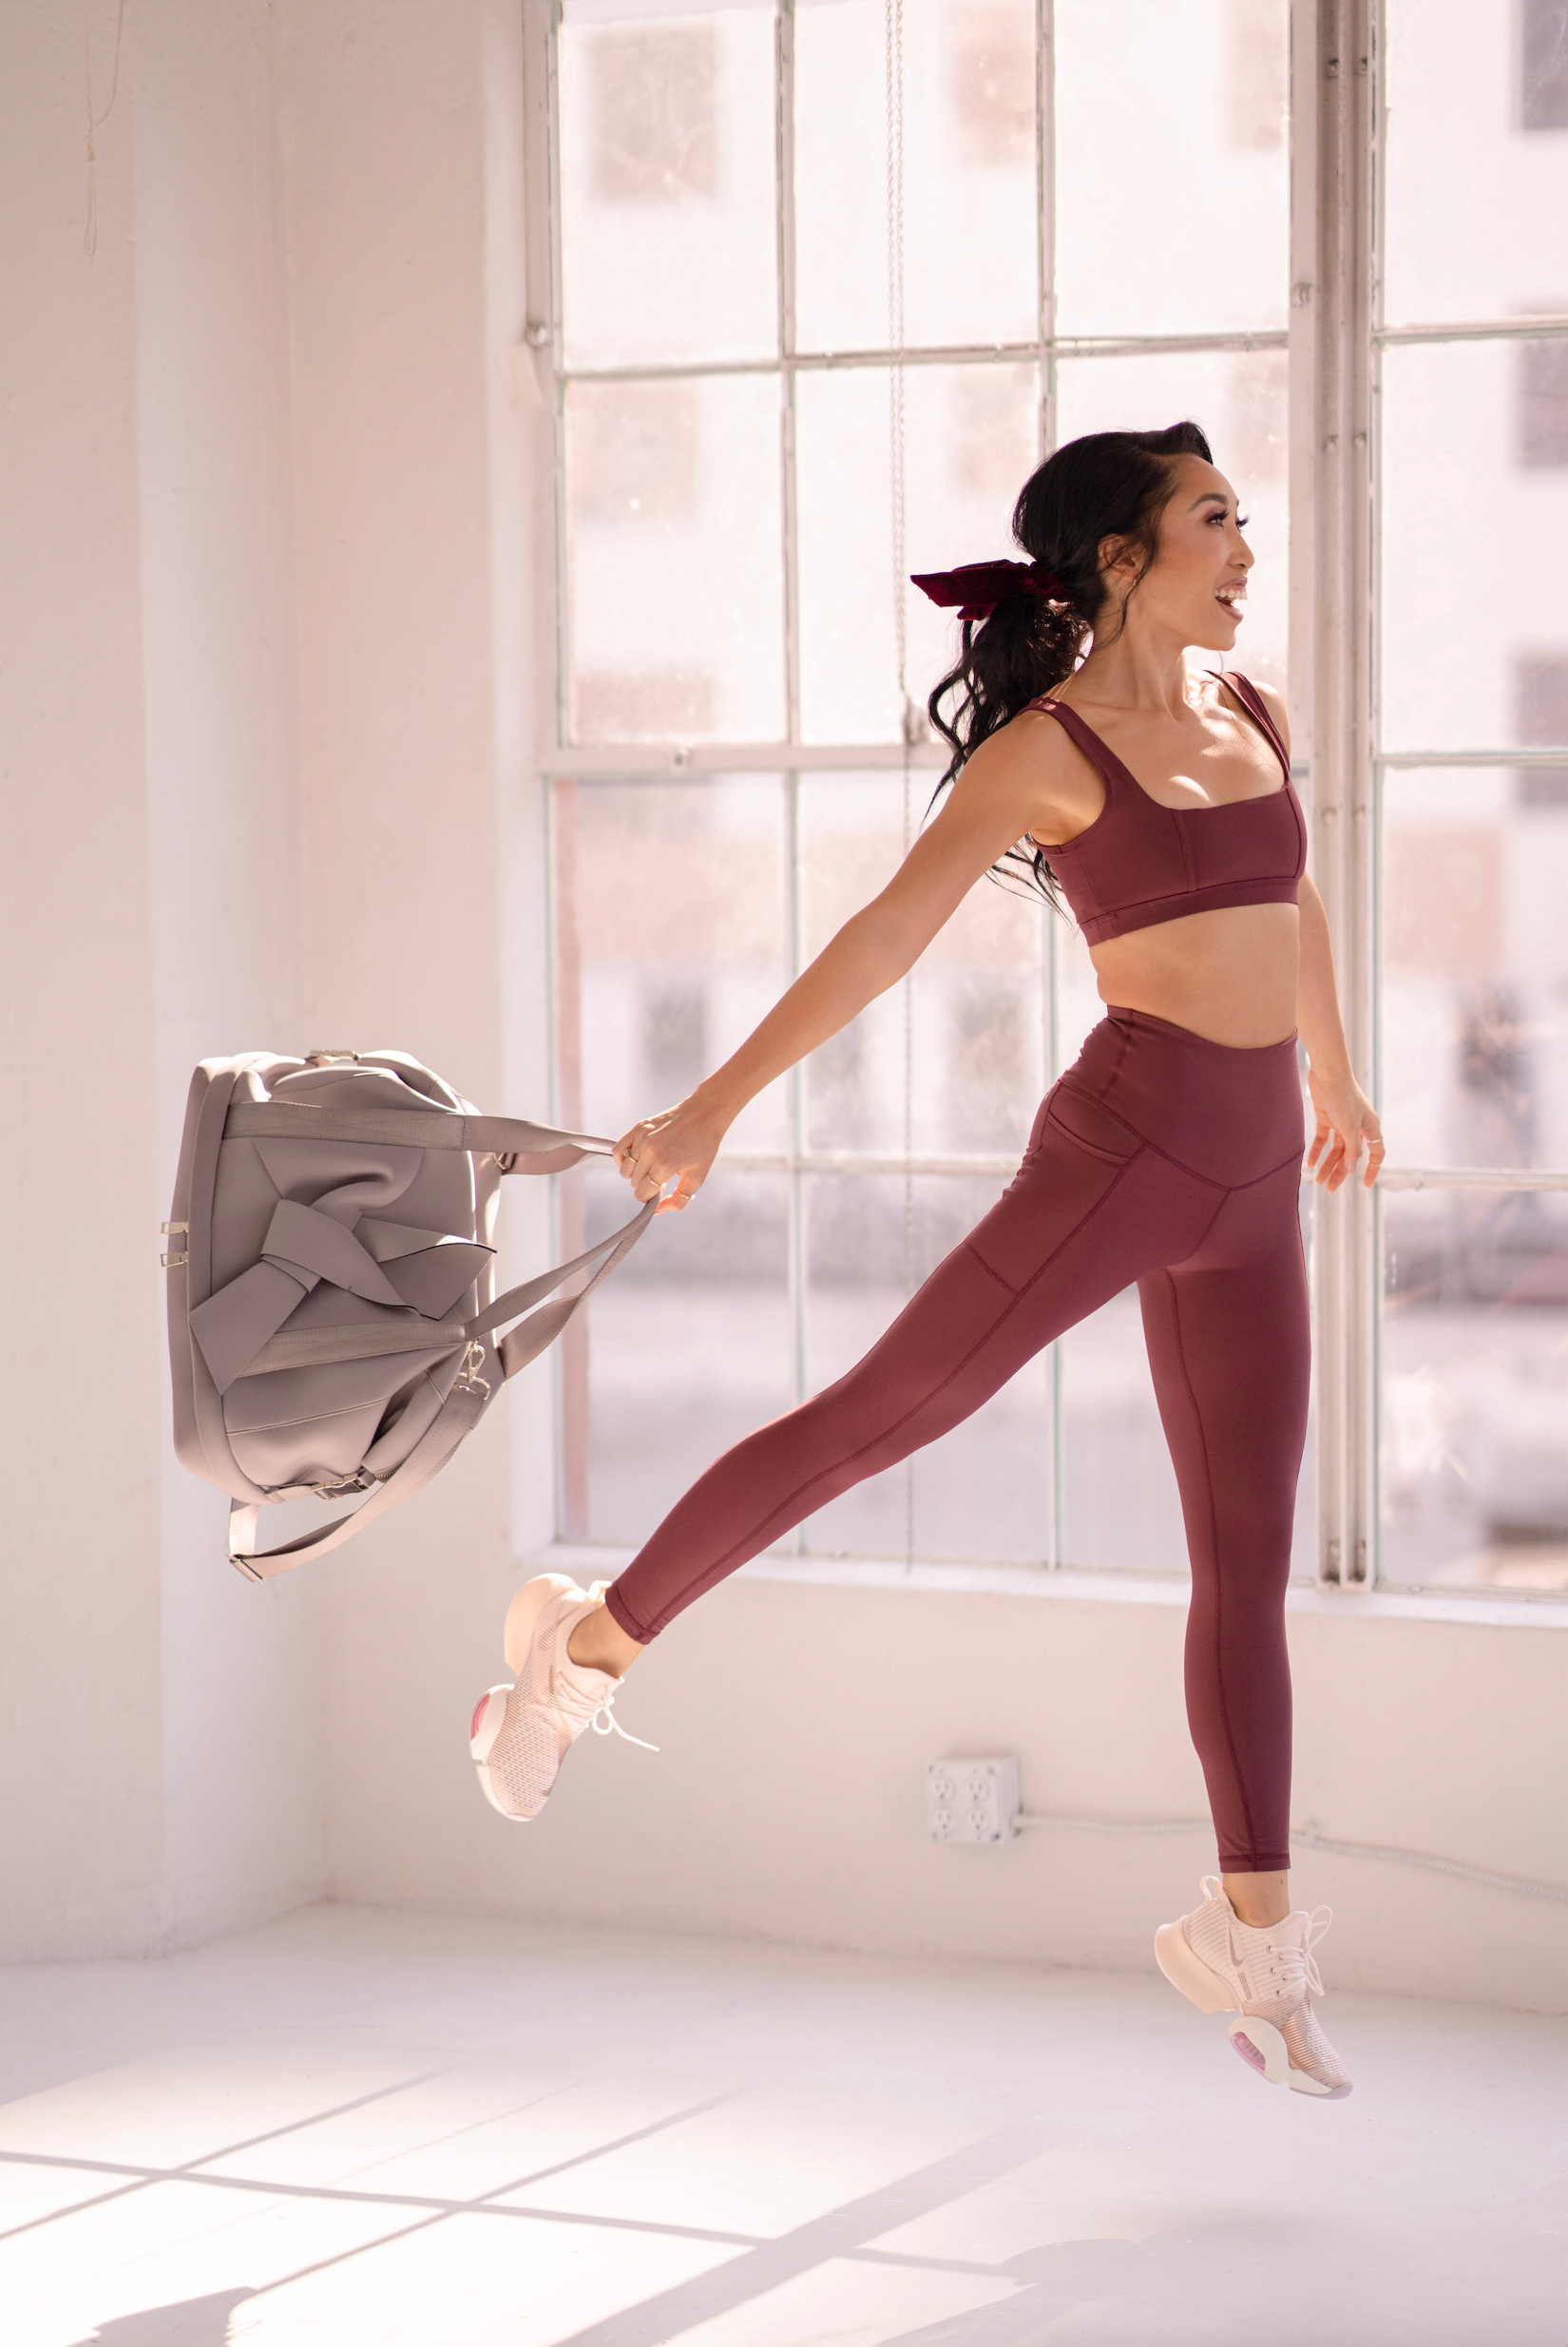 Thoughtfully innovative workout wear designed by Blogilates® for